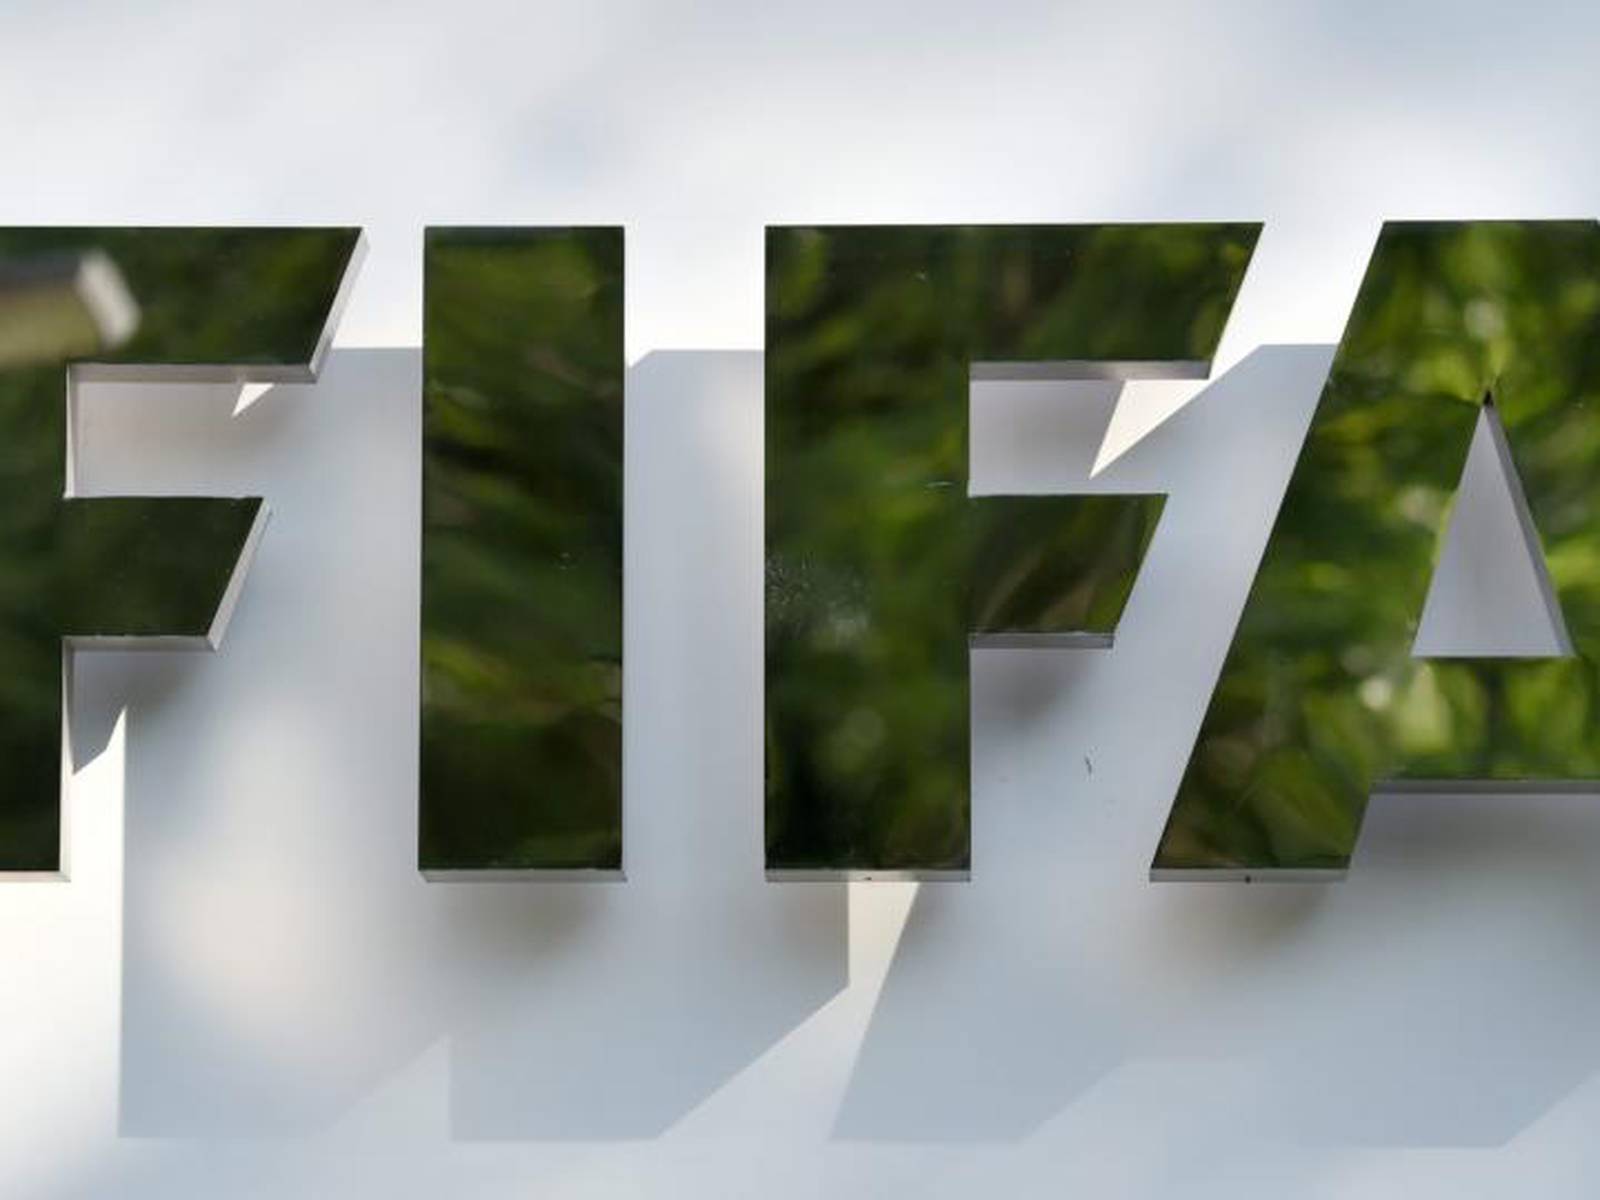 Agents lose appeal against FIFA over new regulations